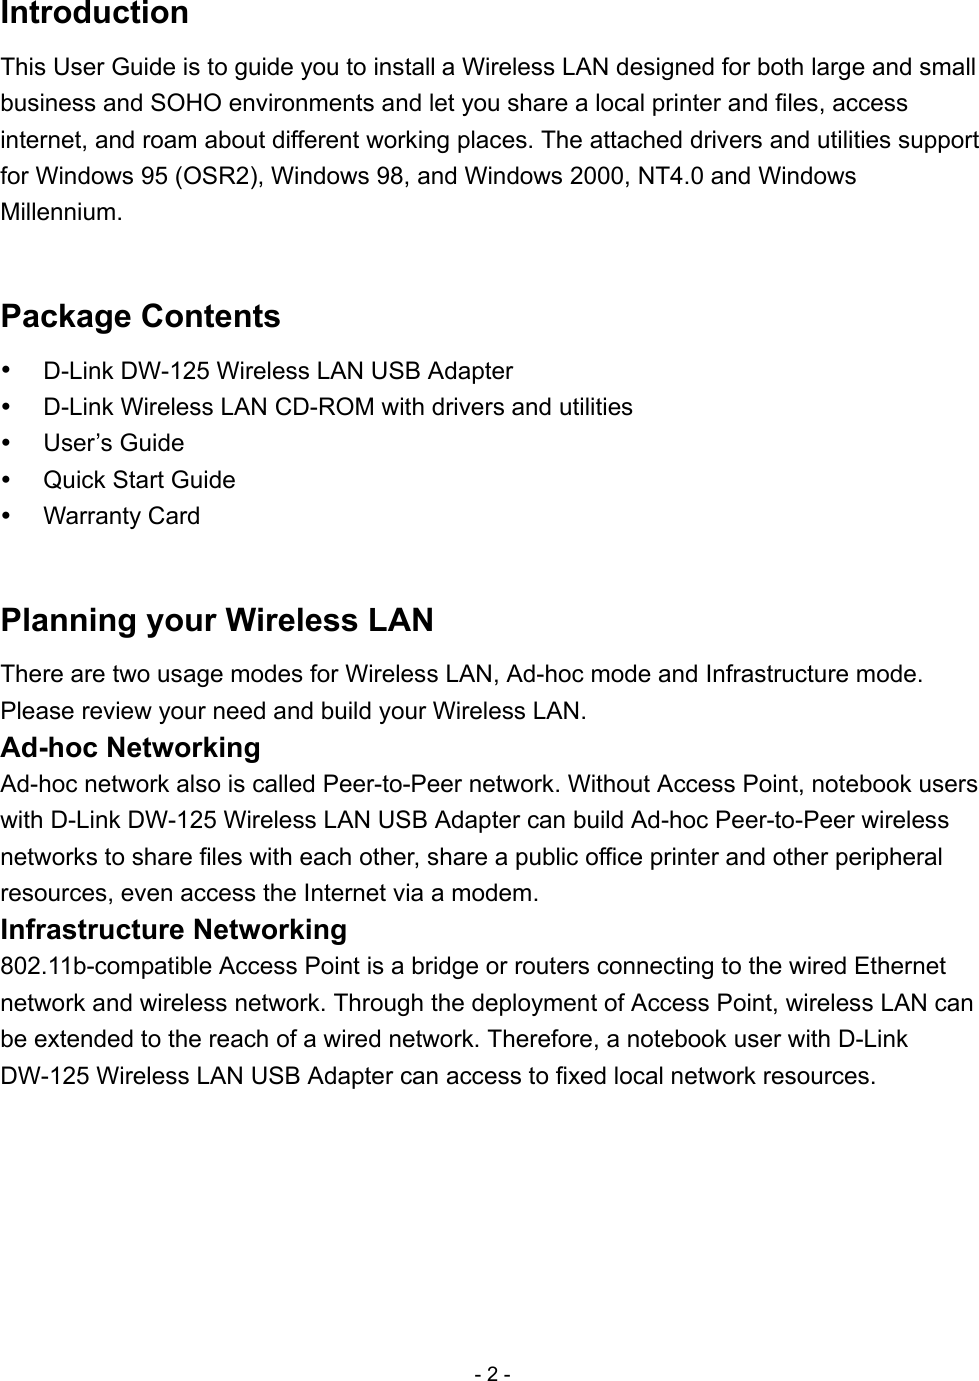 - 2 - Introduction This User Guide is to guide you to install a Wireless LAN designed for both large and small business and SOHO environments and let you share a local printer and files, access internet, and roam about different working places. The attached drivers and utilities support for Windows 95 (OSR2), Windows 98, and Windows 2000, NT4.0 and Windows Millennium.  Package Contents   D-Link DW-125 Wireless LAN USB Adapter   D-Link Wireless LAN CD-ROM with drivers and utilities   User’s Guide   Quick Start Guide   Warranty Card  Planning your Wireless LAN There are two usage modes for Wireless LAN, Ad-hoc mode and Infrastructure mode. Please review your need and build your Wireless LAN. Ad-hoc Networking Ad-hoc network also is called Peer-to-Peer network. Without Access Point, notebook users with D-Link DW-125 Wireless LAN USB Adapter can build Ad-hoc Peer-to-Peer wireless networks to share files with each other, share a public office printer and other peripheral resources, even access the Internet via a modem. Infrastructure Networking 802.11b-compatible Access Point is a bridge or routers connecting to the wired Ethernet network and wireless network. Through the deployment of Access Point, wireless LAN can be extended to the reach of a wired network. Therefore, a notebook user with D-Link DW-125 Wireless LAN USB Adapter can access to fixed local network resources. 